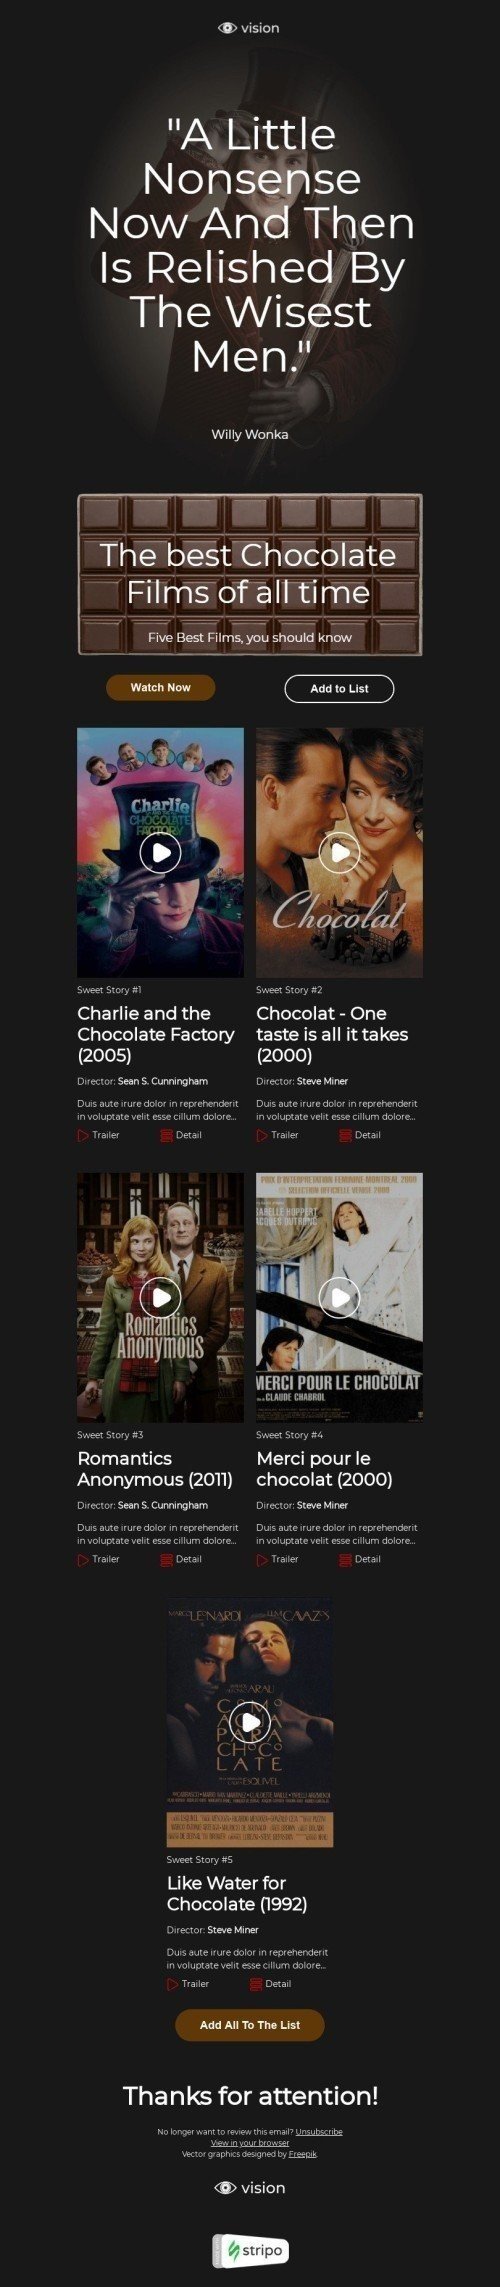 International Chocolate Day Email Template «Five Sweet Stories» for Movies industry desktop view